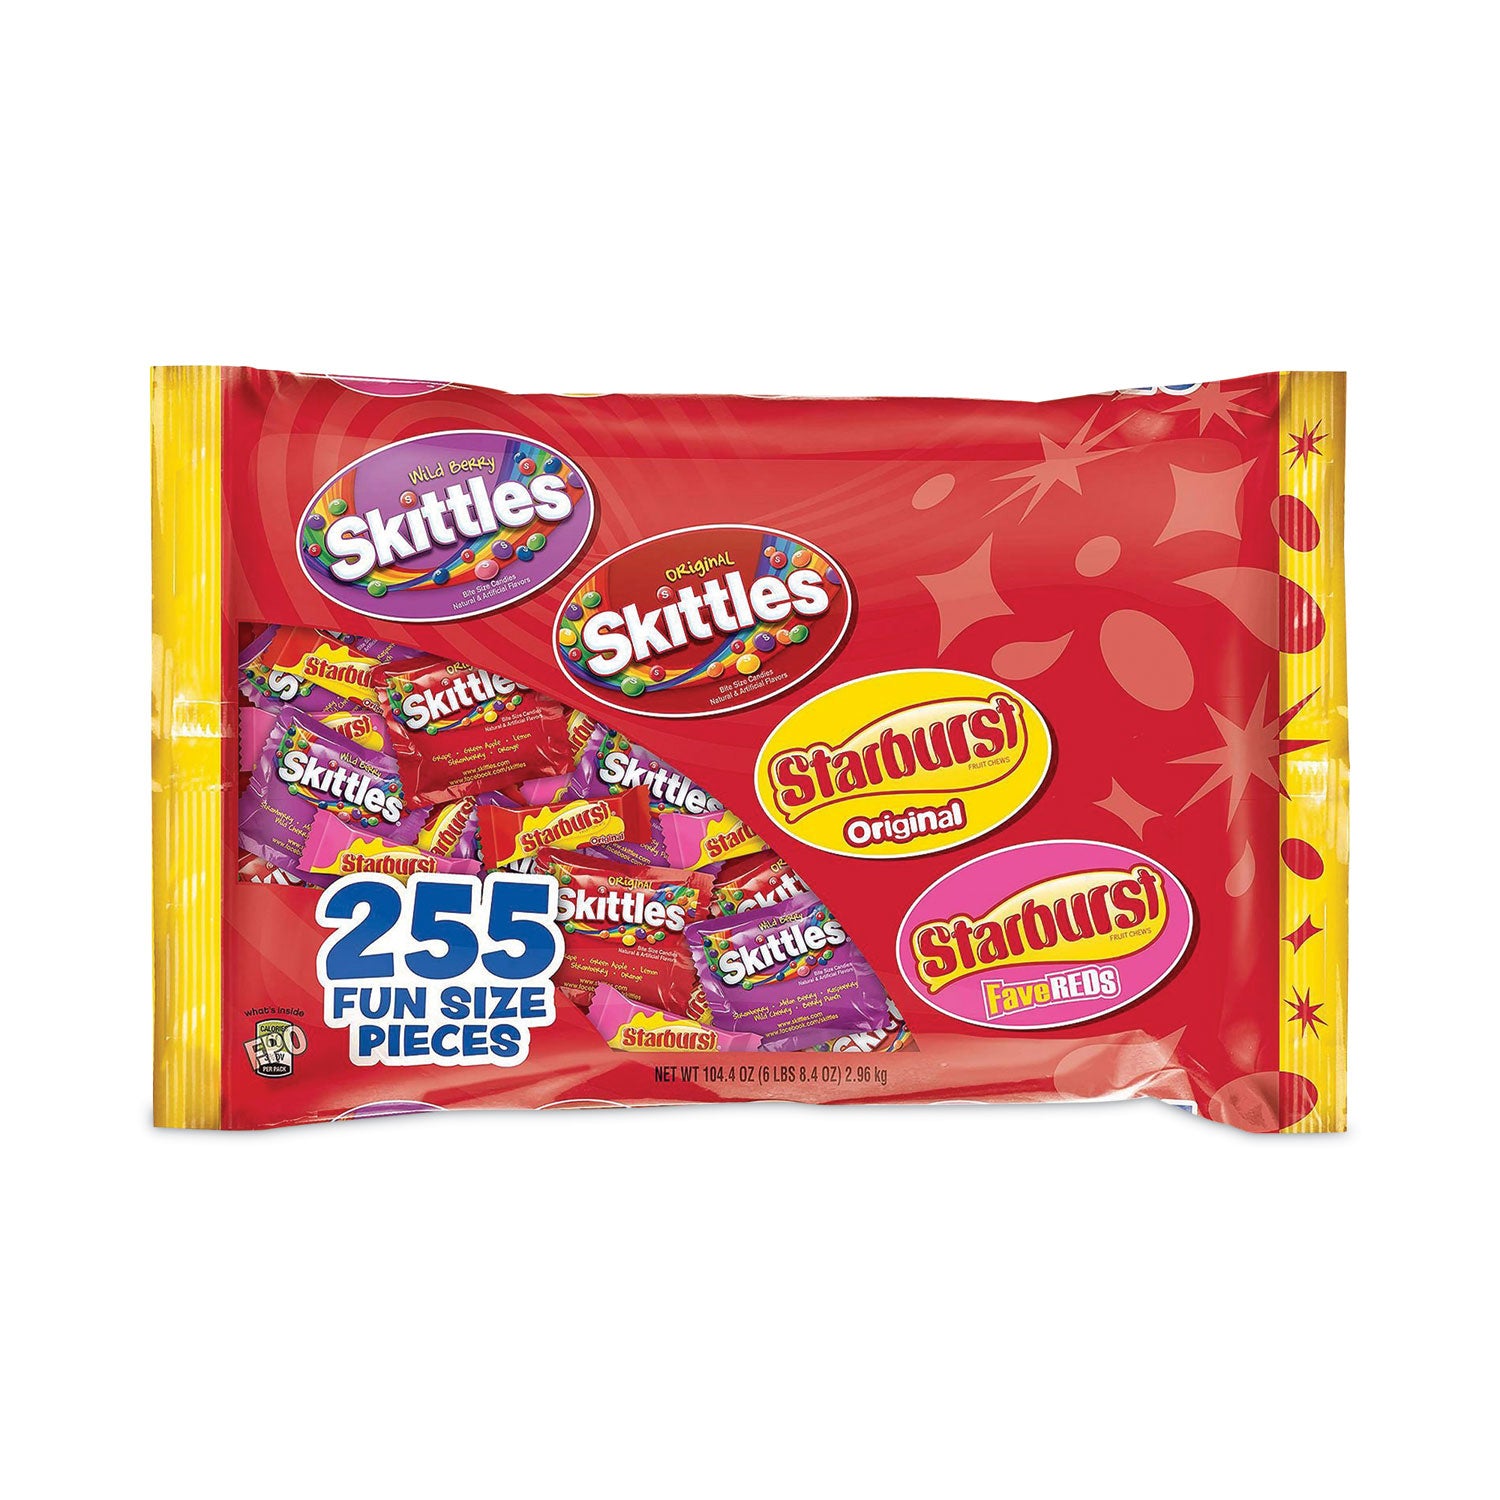 skittles-and-starburst-fun-size-variety-pack-6-lb-84-oz-bag-ships-in-1-3-business-days_grr22000768 - 1